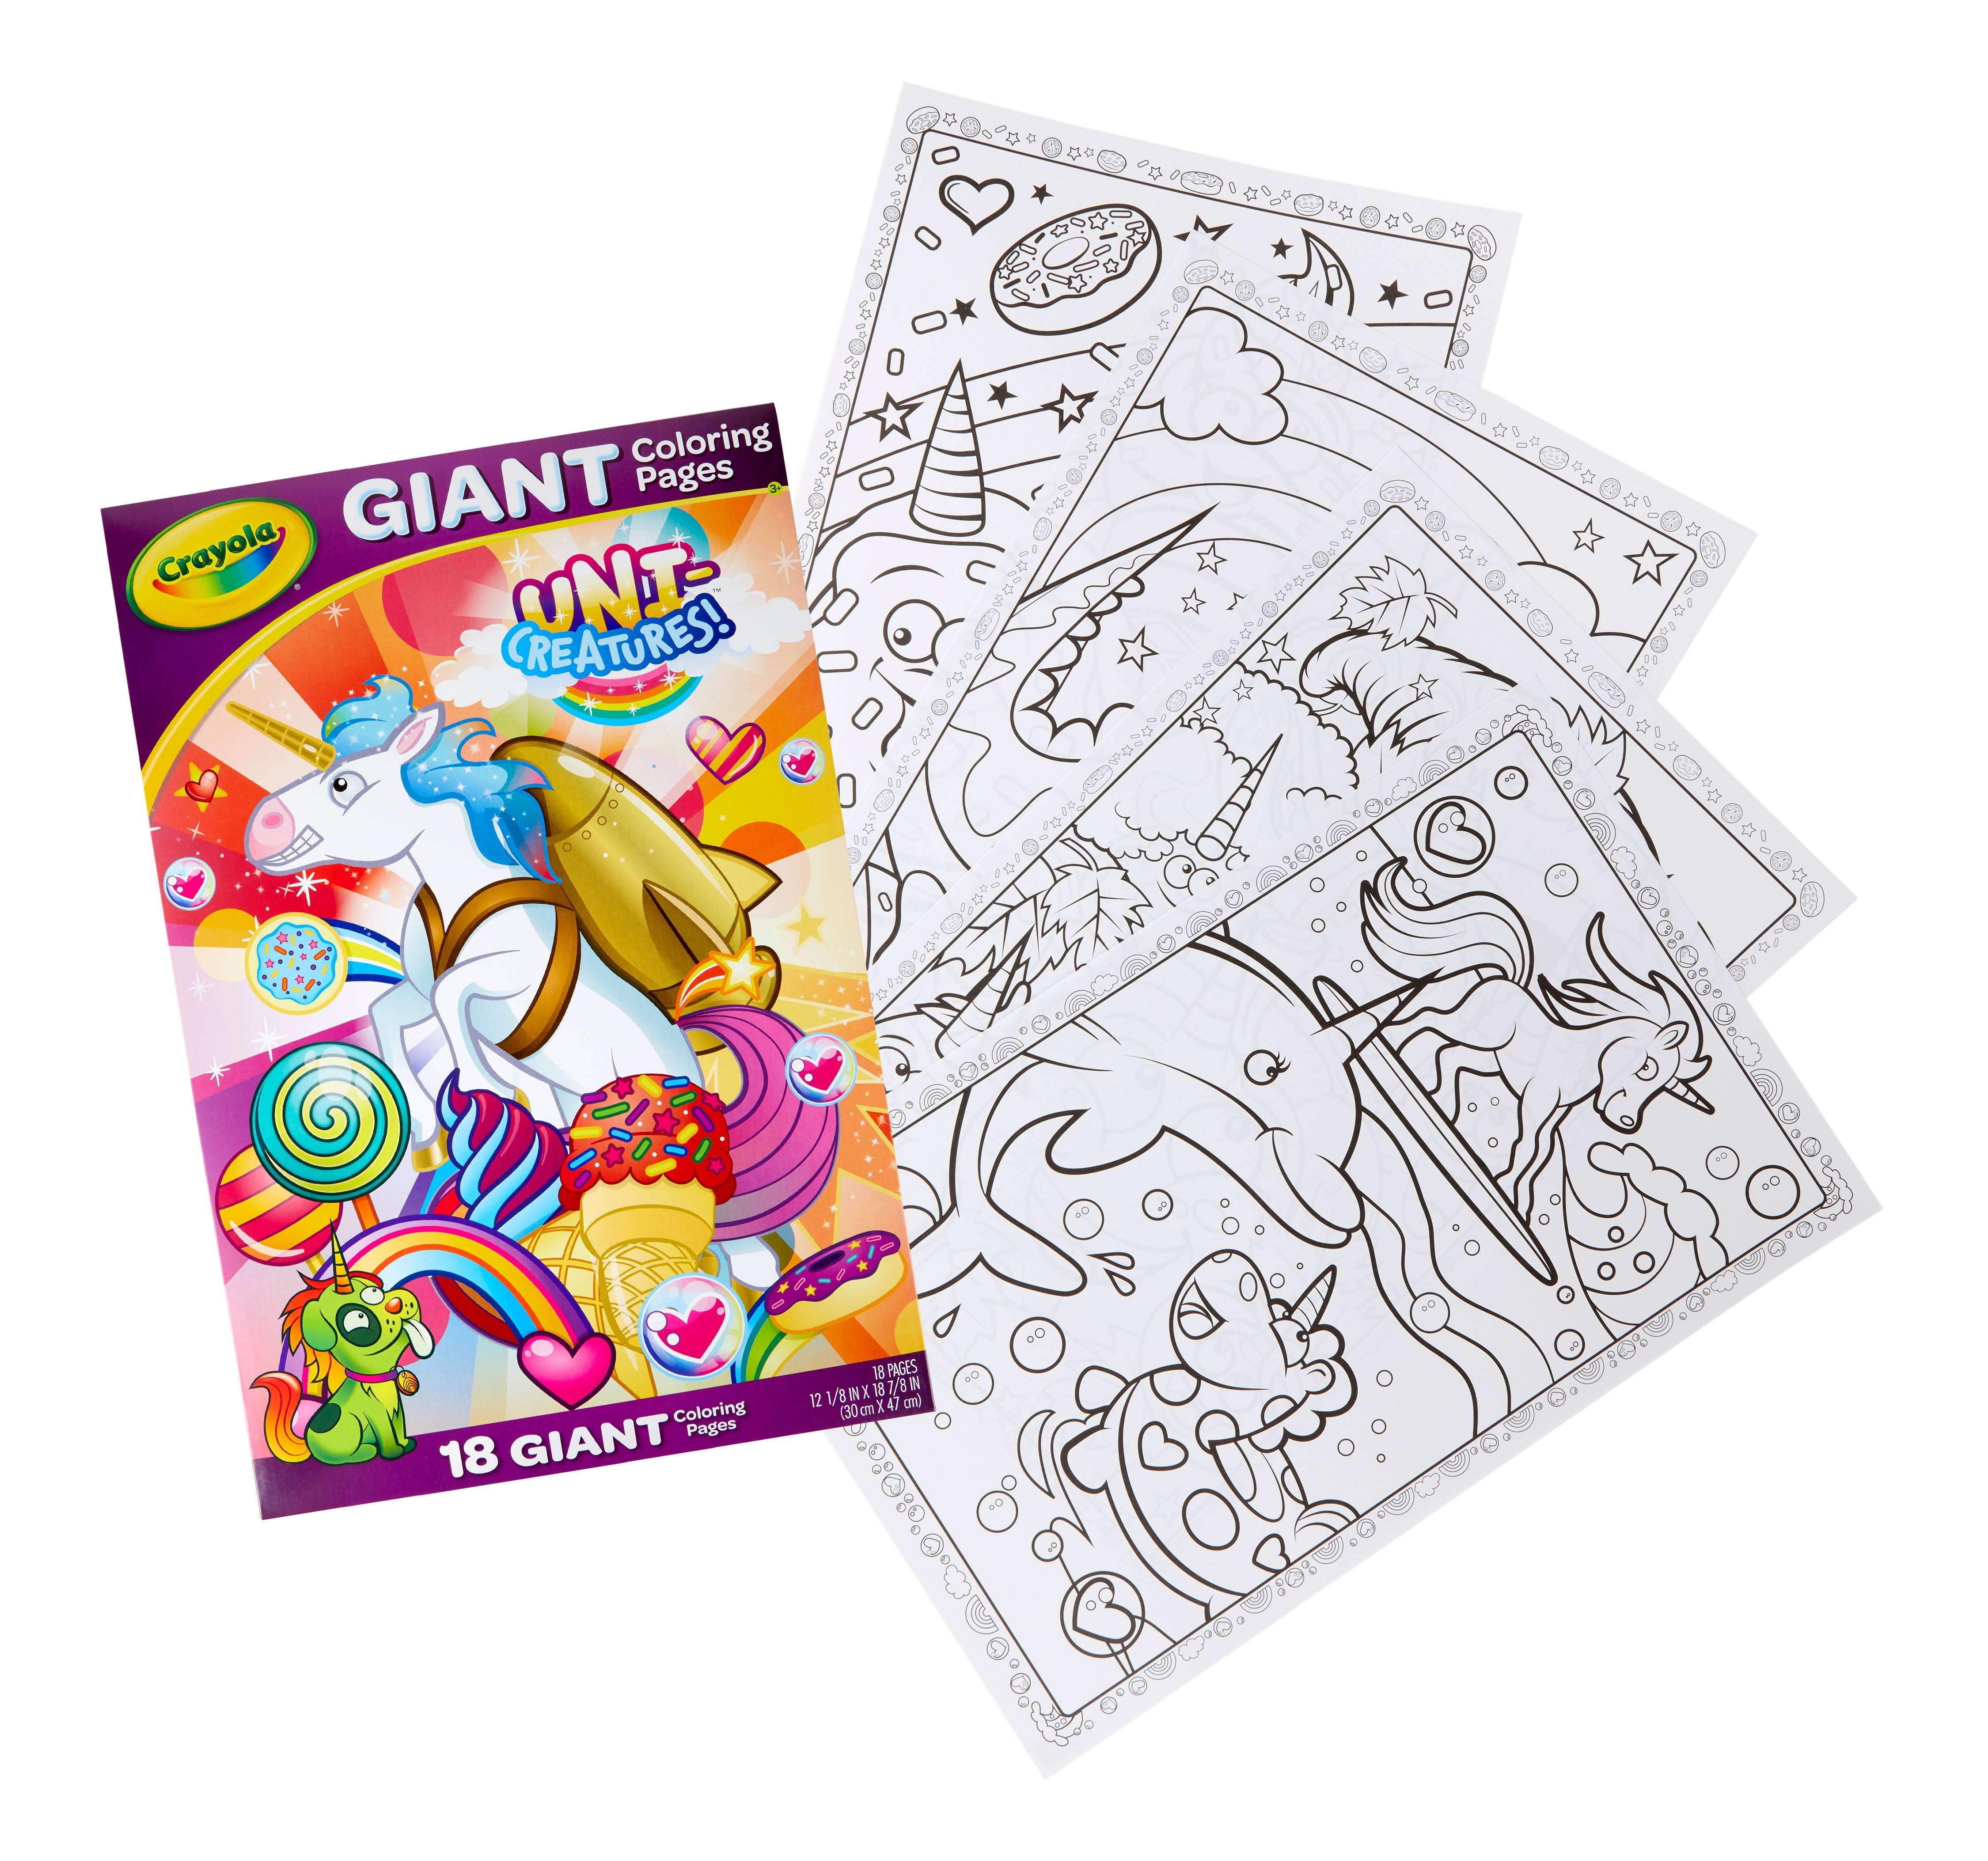 Crayola giant colouring pages